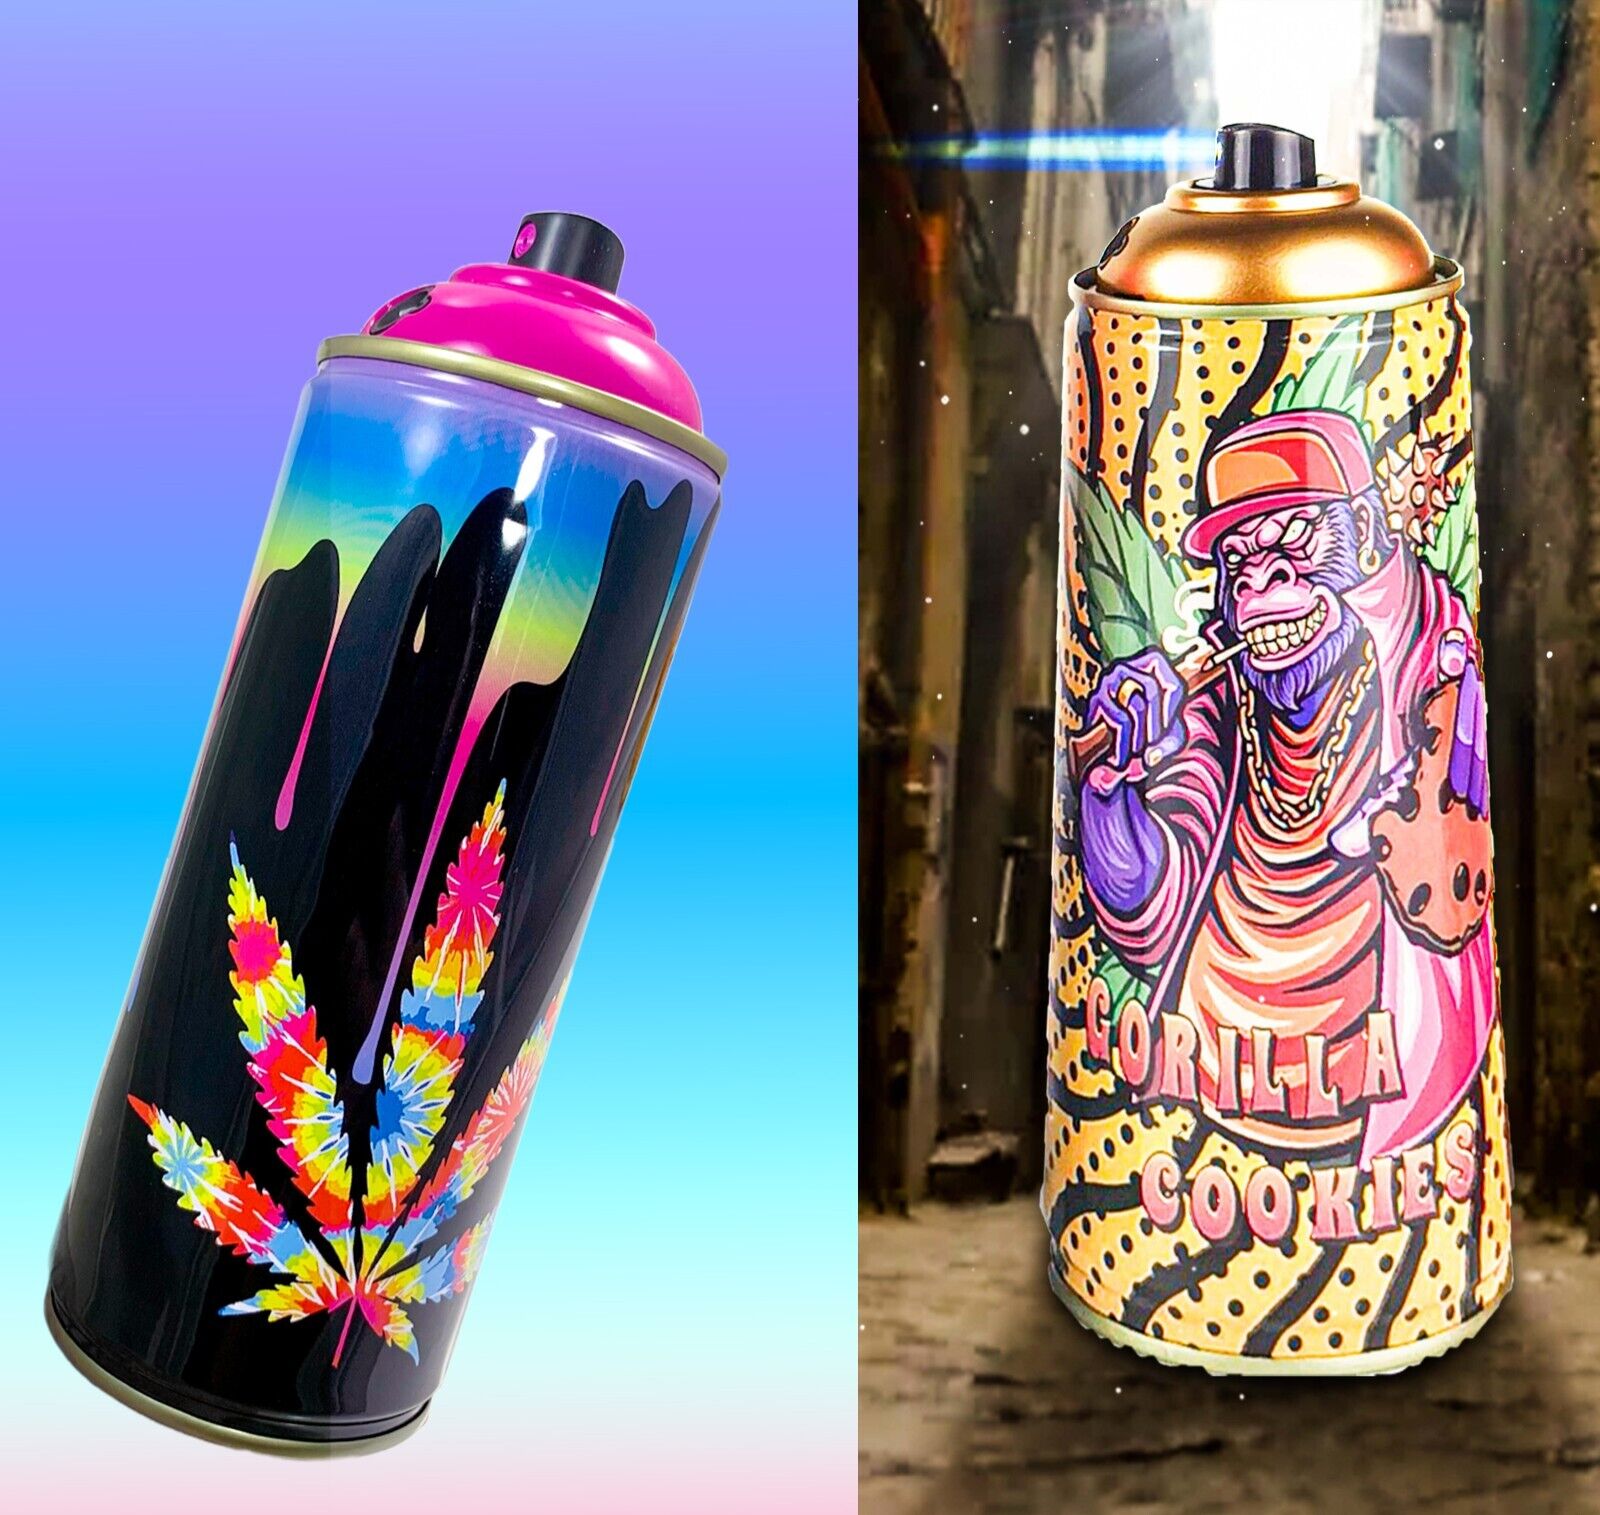 1x Techno Torch Spray Can Torch Windproof Adjustable Refillable (Random Designs)